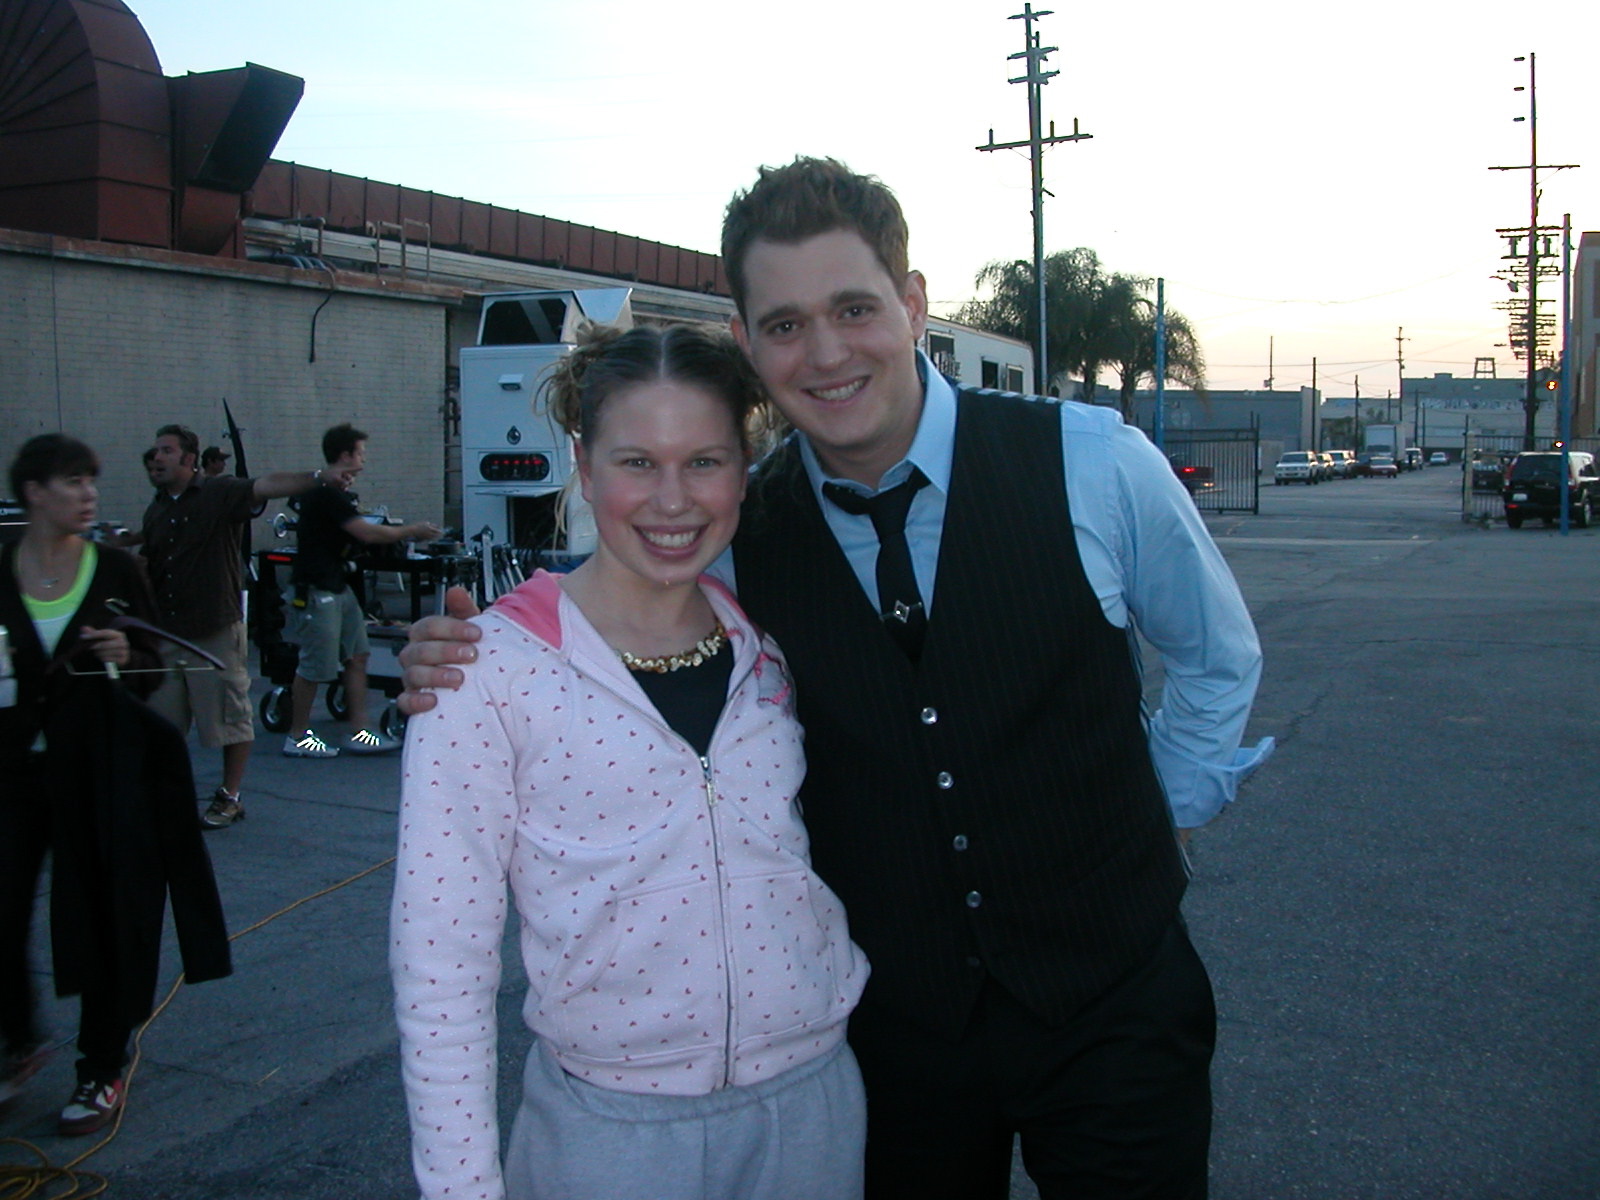 Hayley with Michael Buble on the set of his music video 